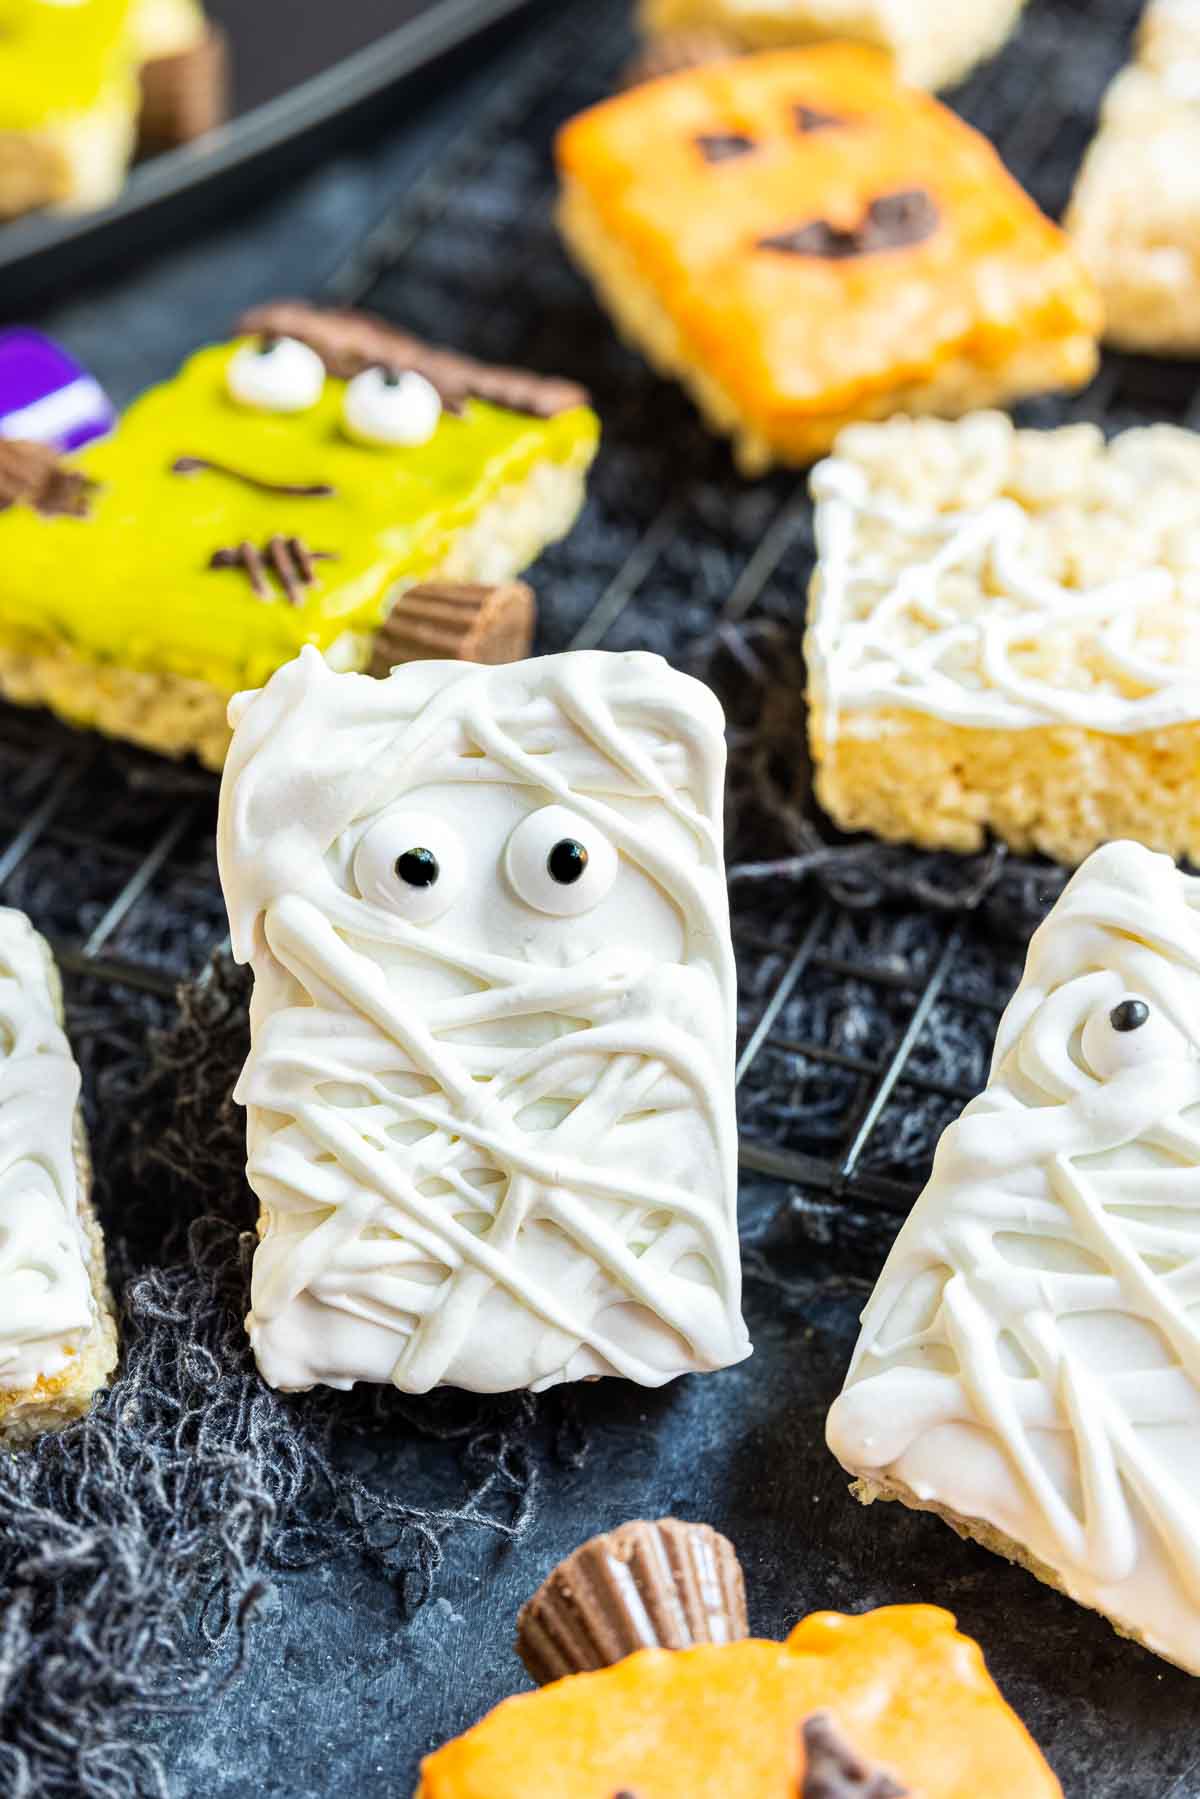 Mummy Rice Krispies Treats decorated with colored candy melts